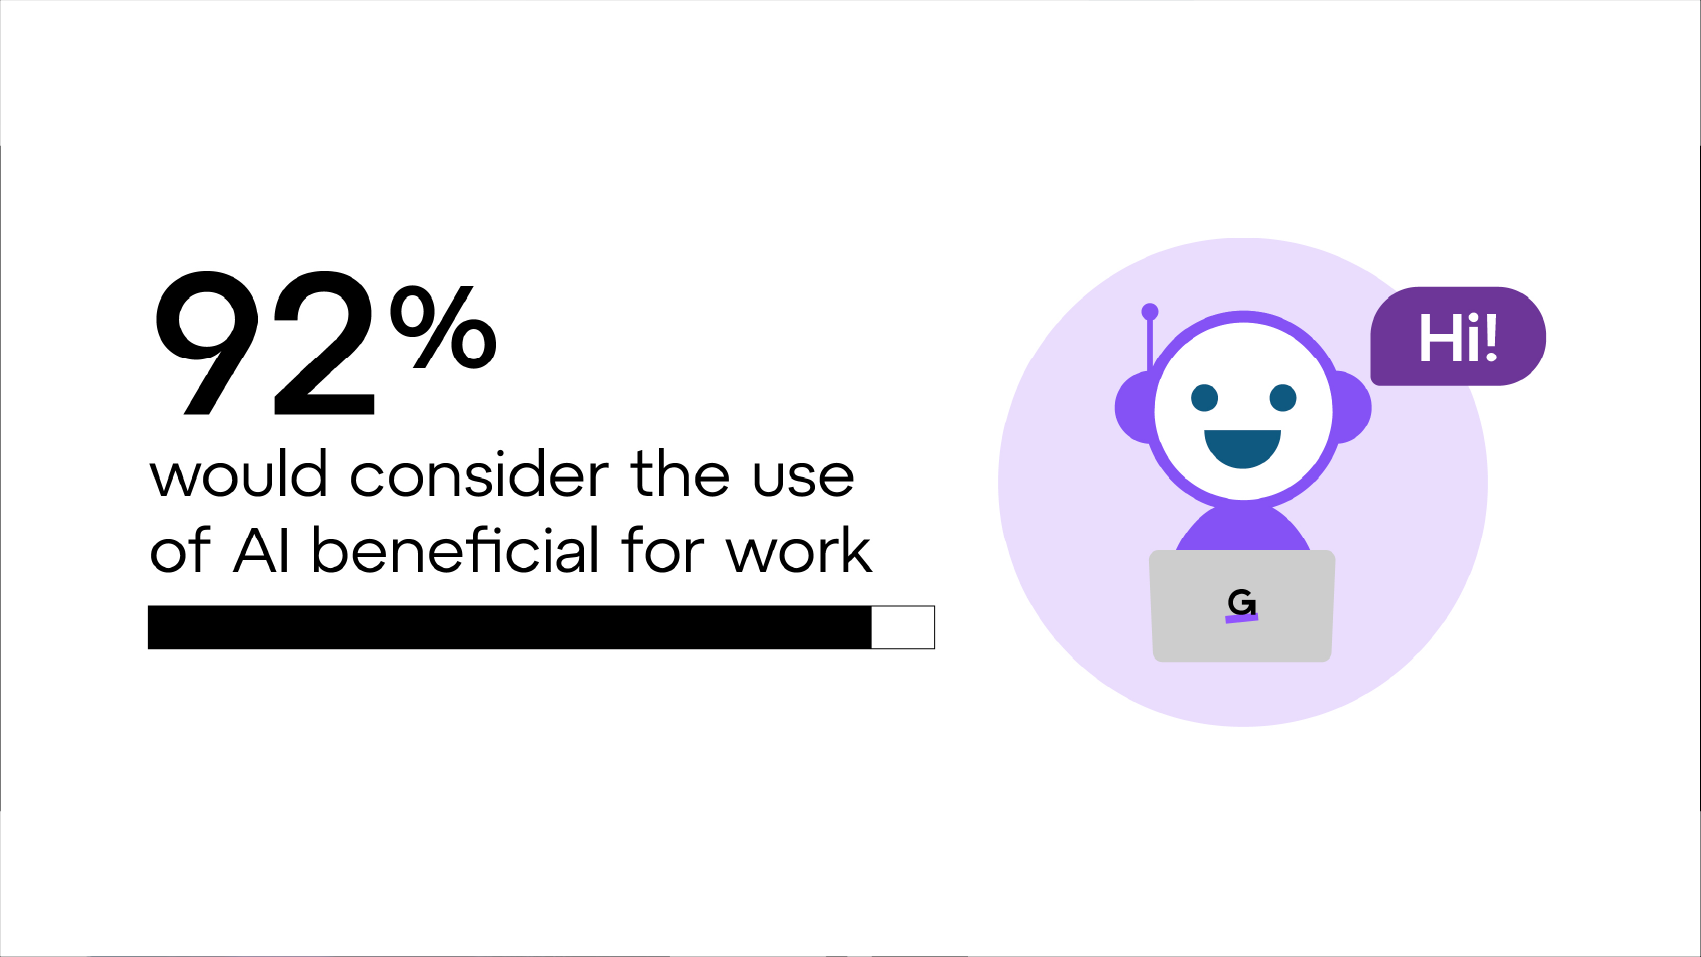 92% would consider the use of AI beneficial for work.